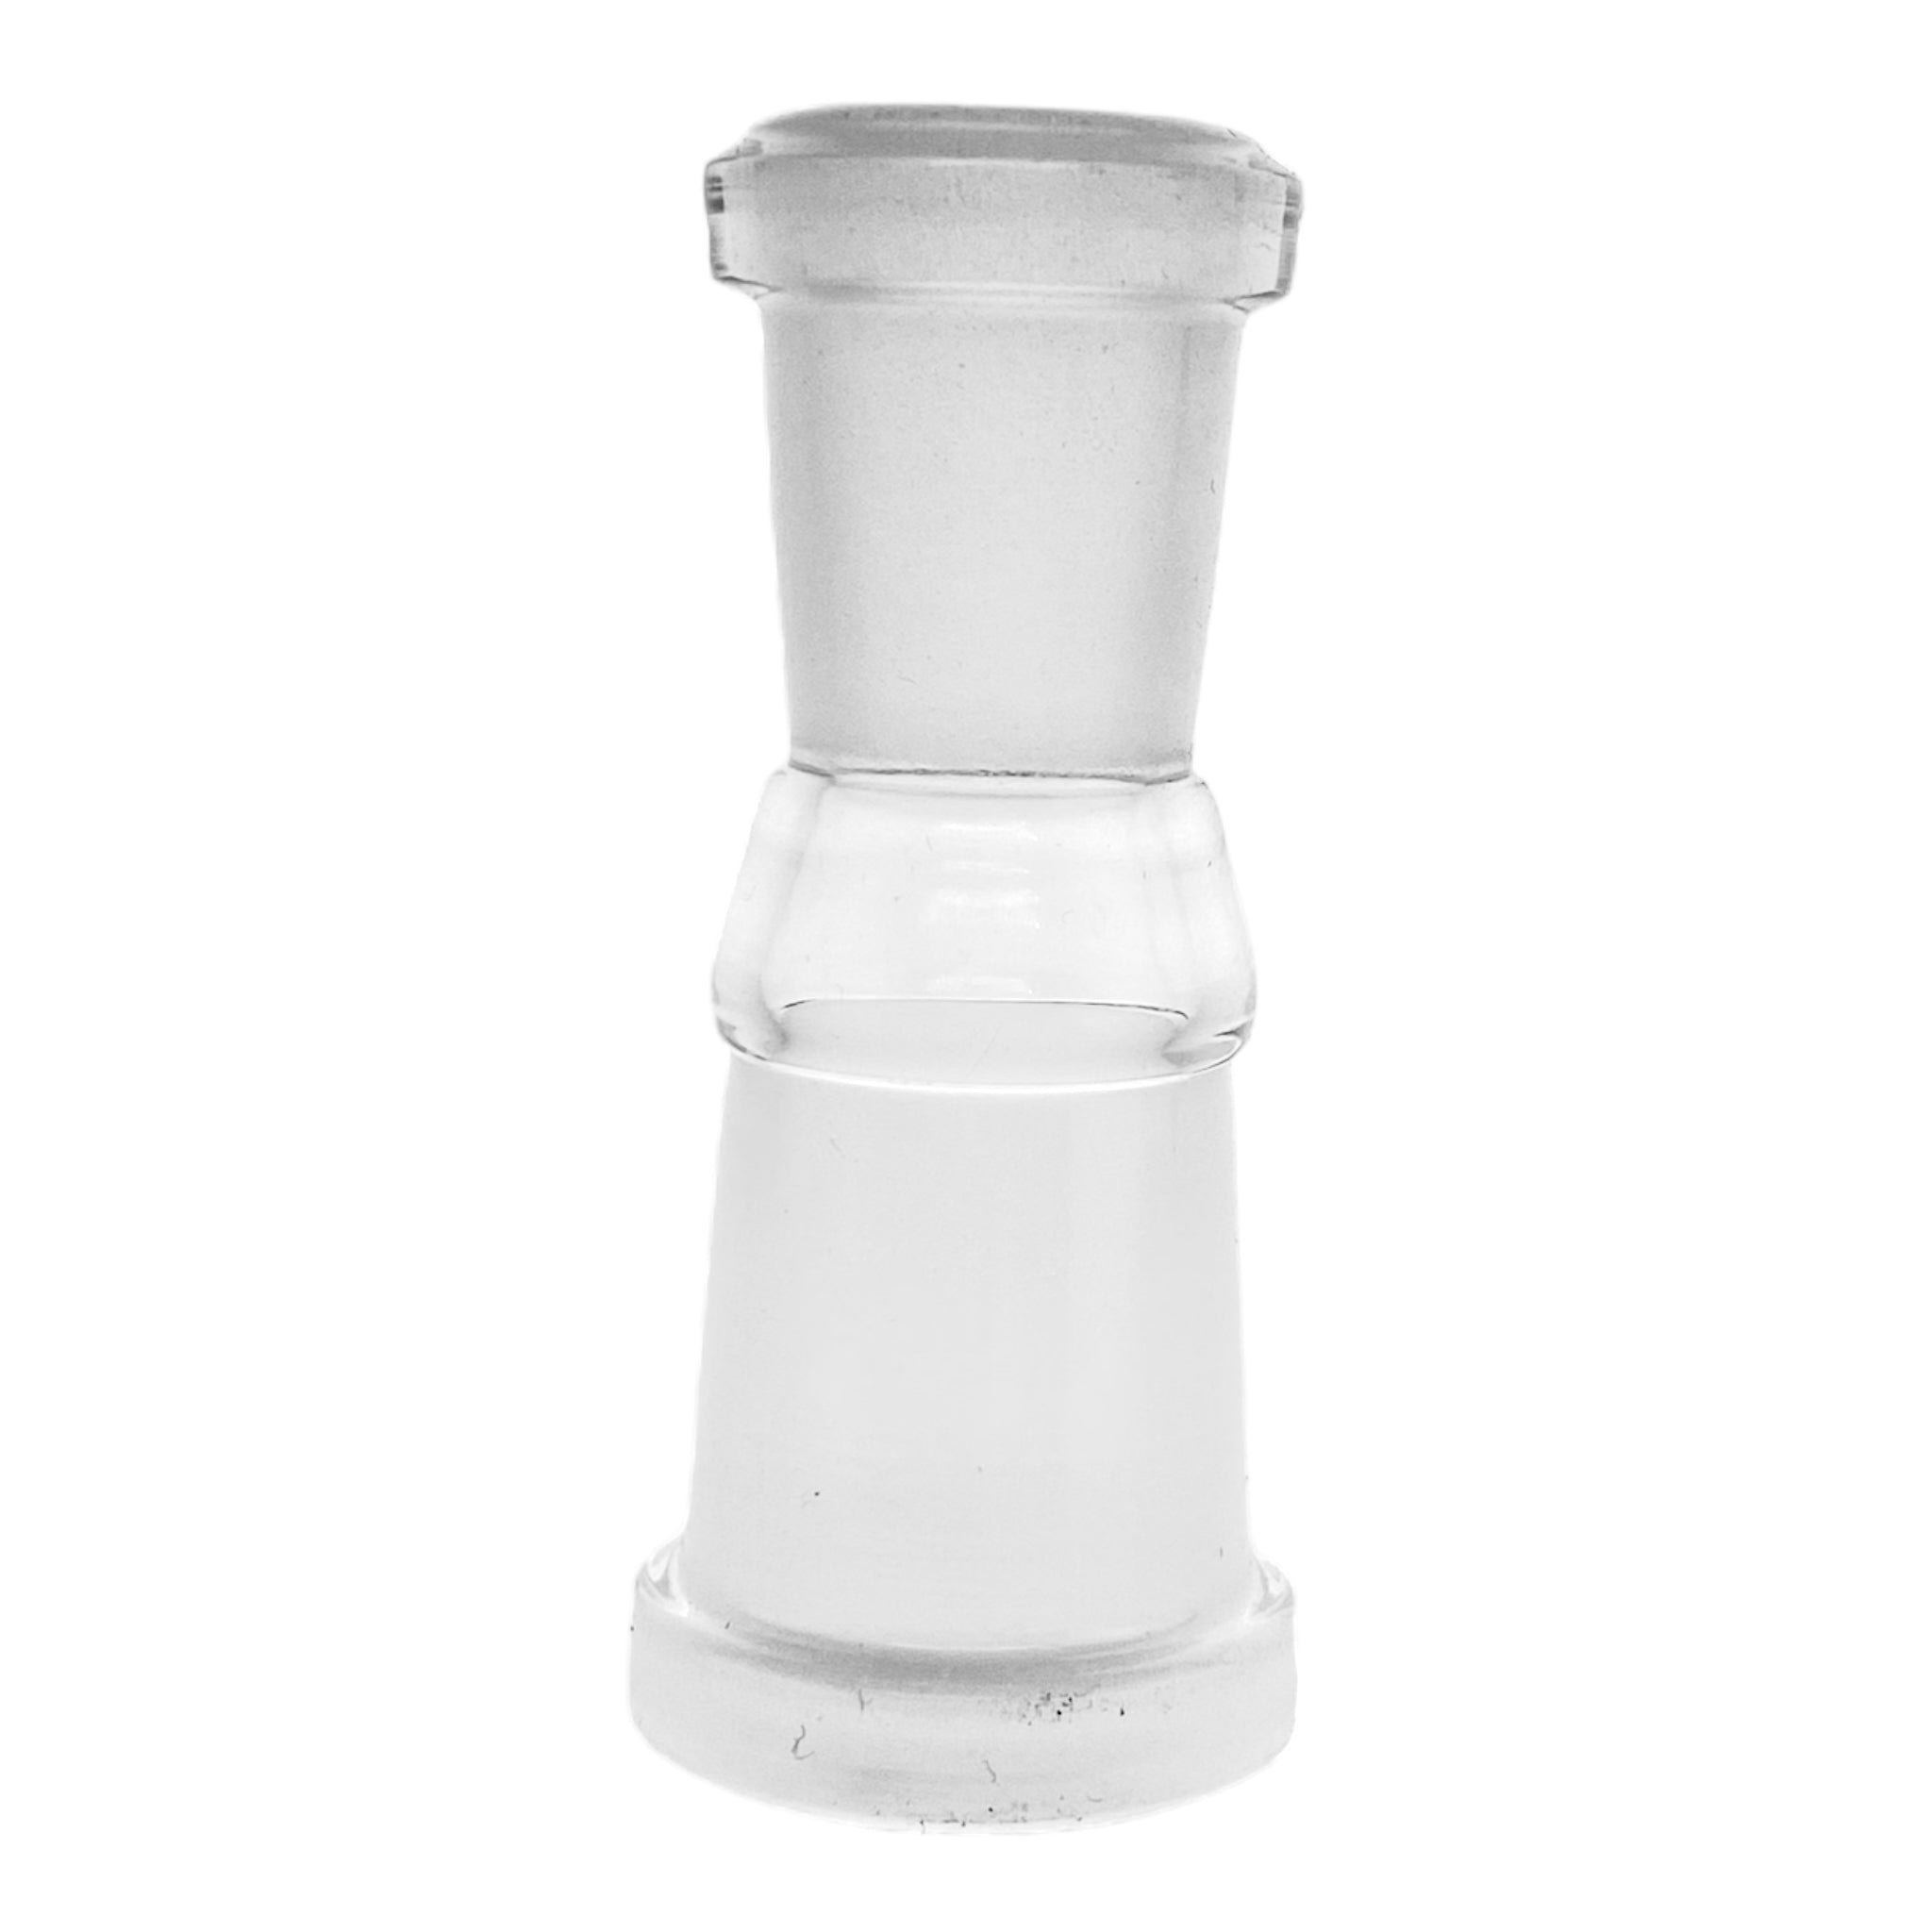 Glass Adapter For Bongs And Dab Rigs - 18MM Female To 14MM Female